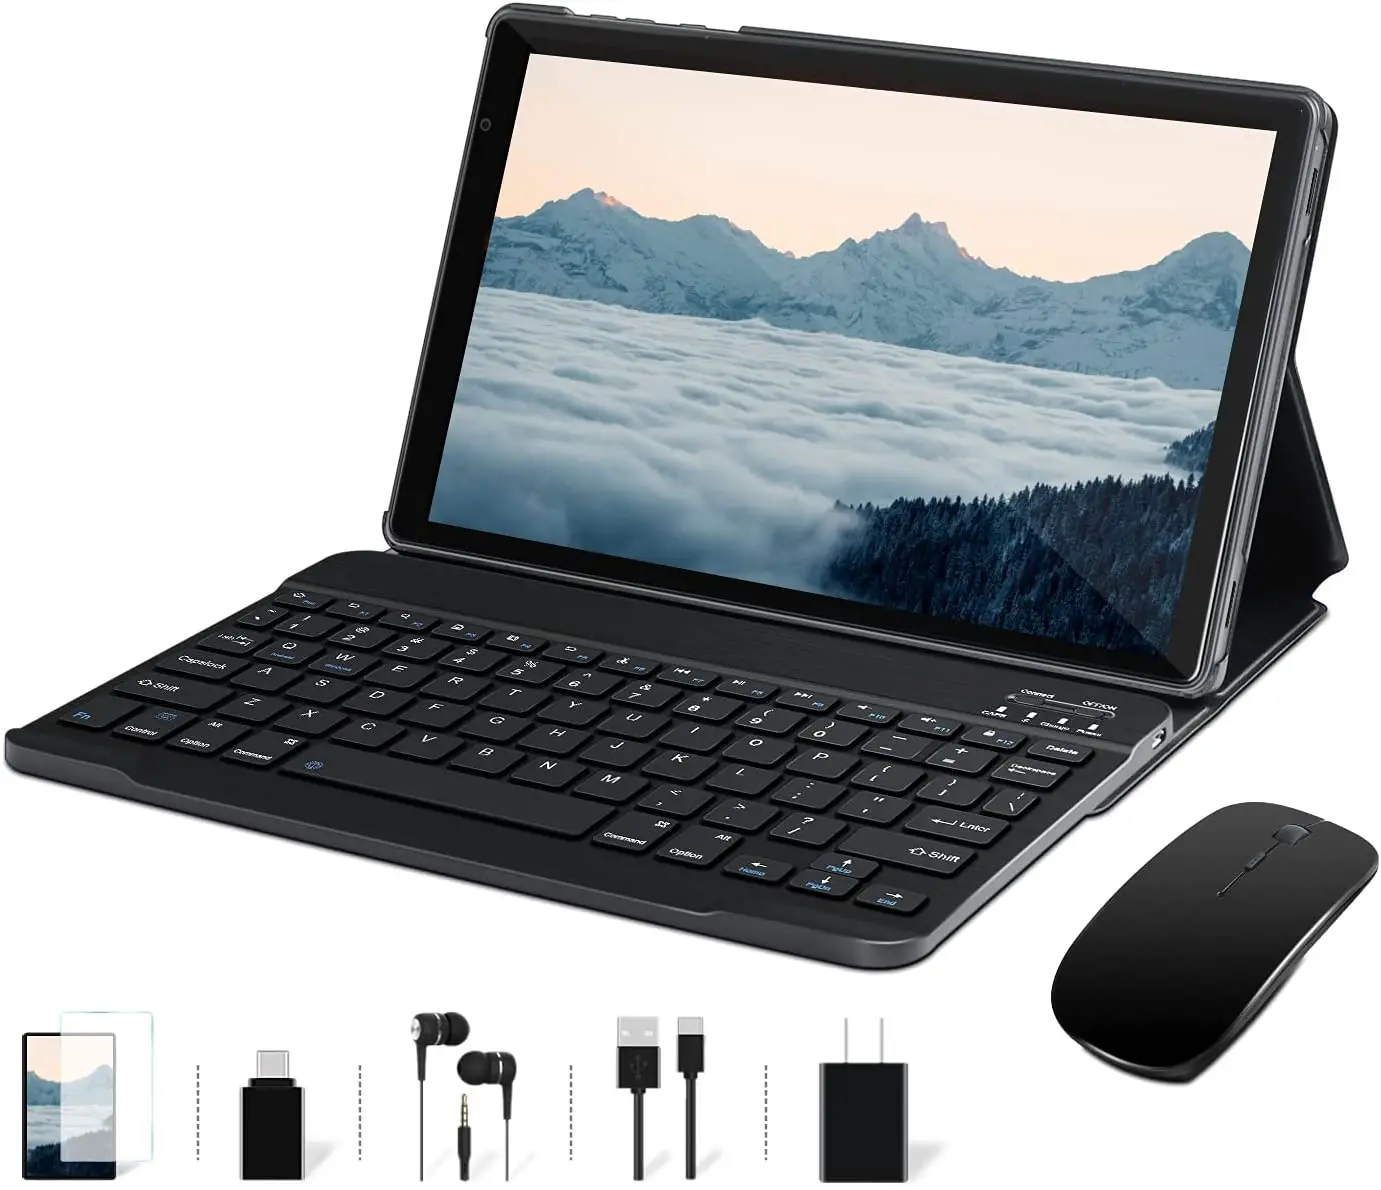  FACETEL 10 inch Tablet Android Tablet with Keyboard 2